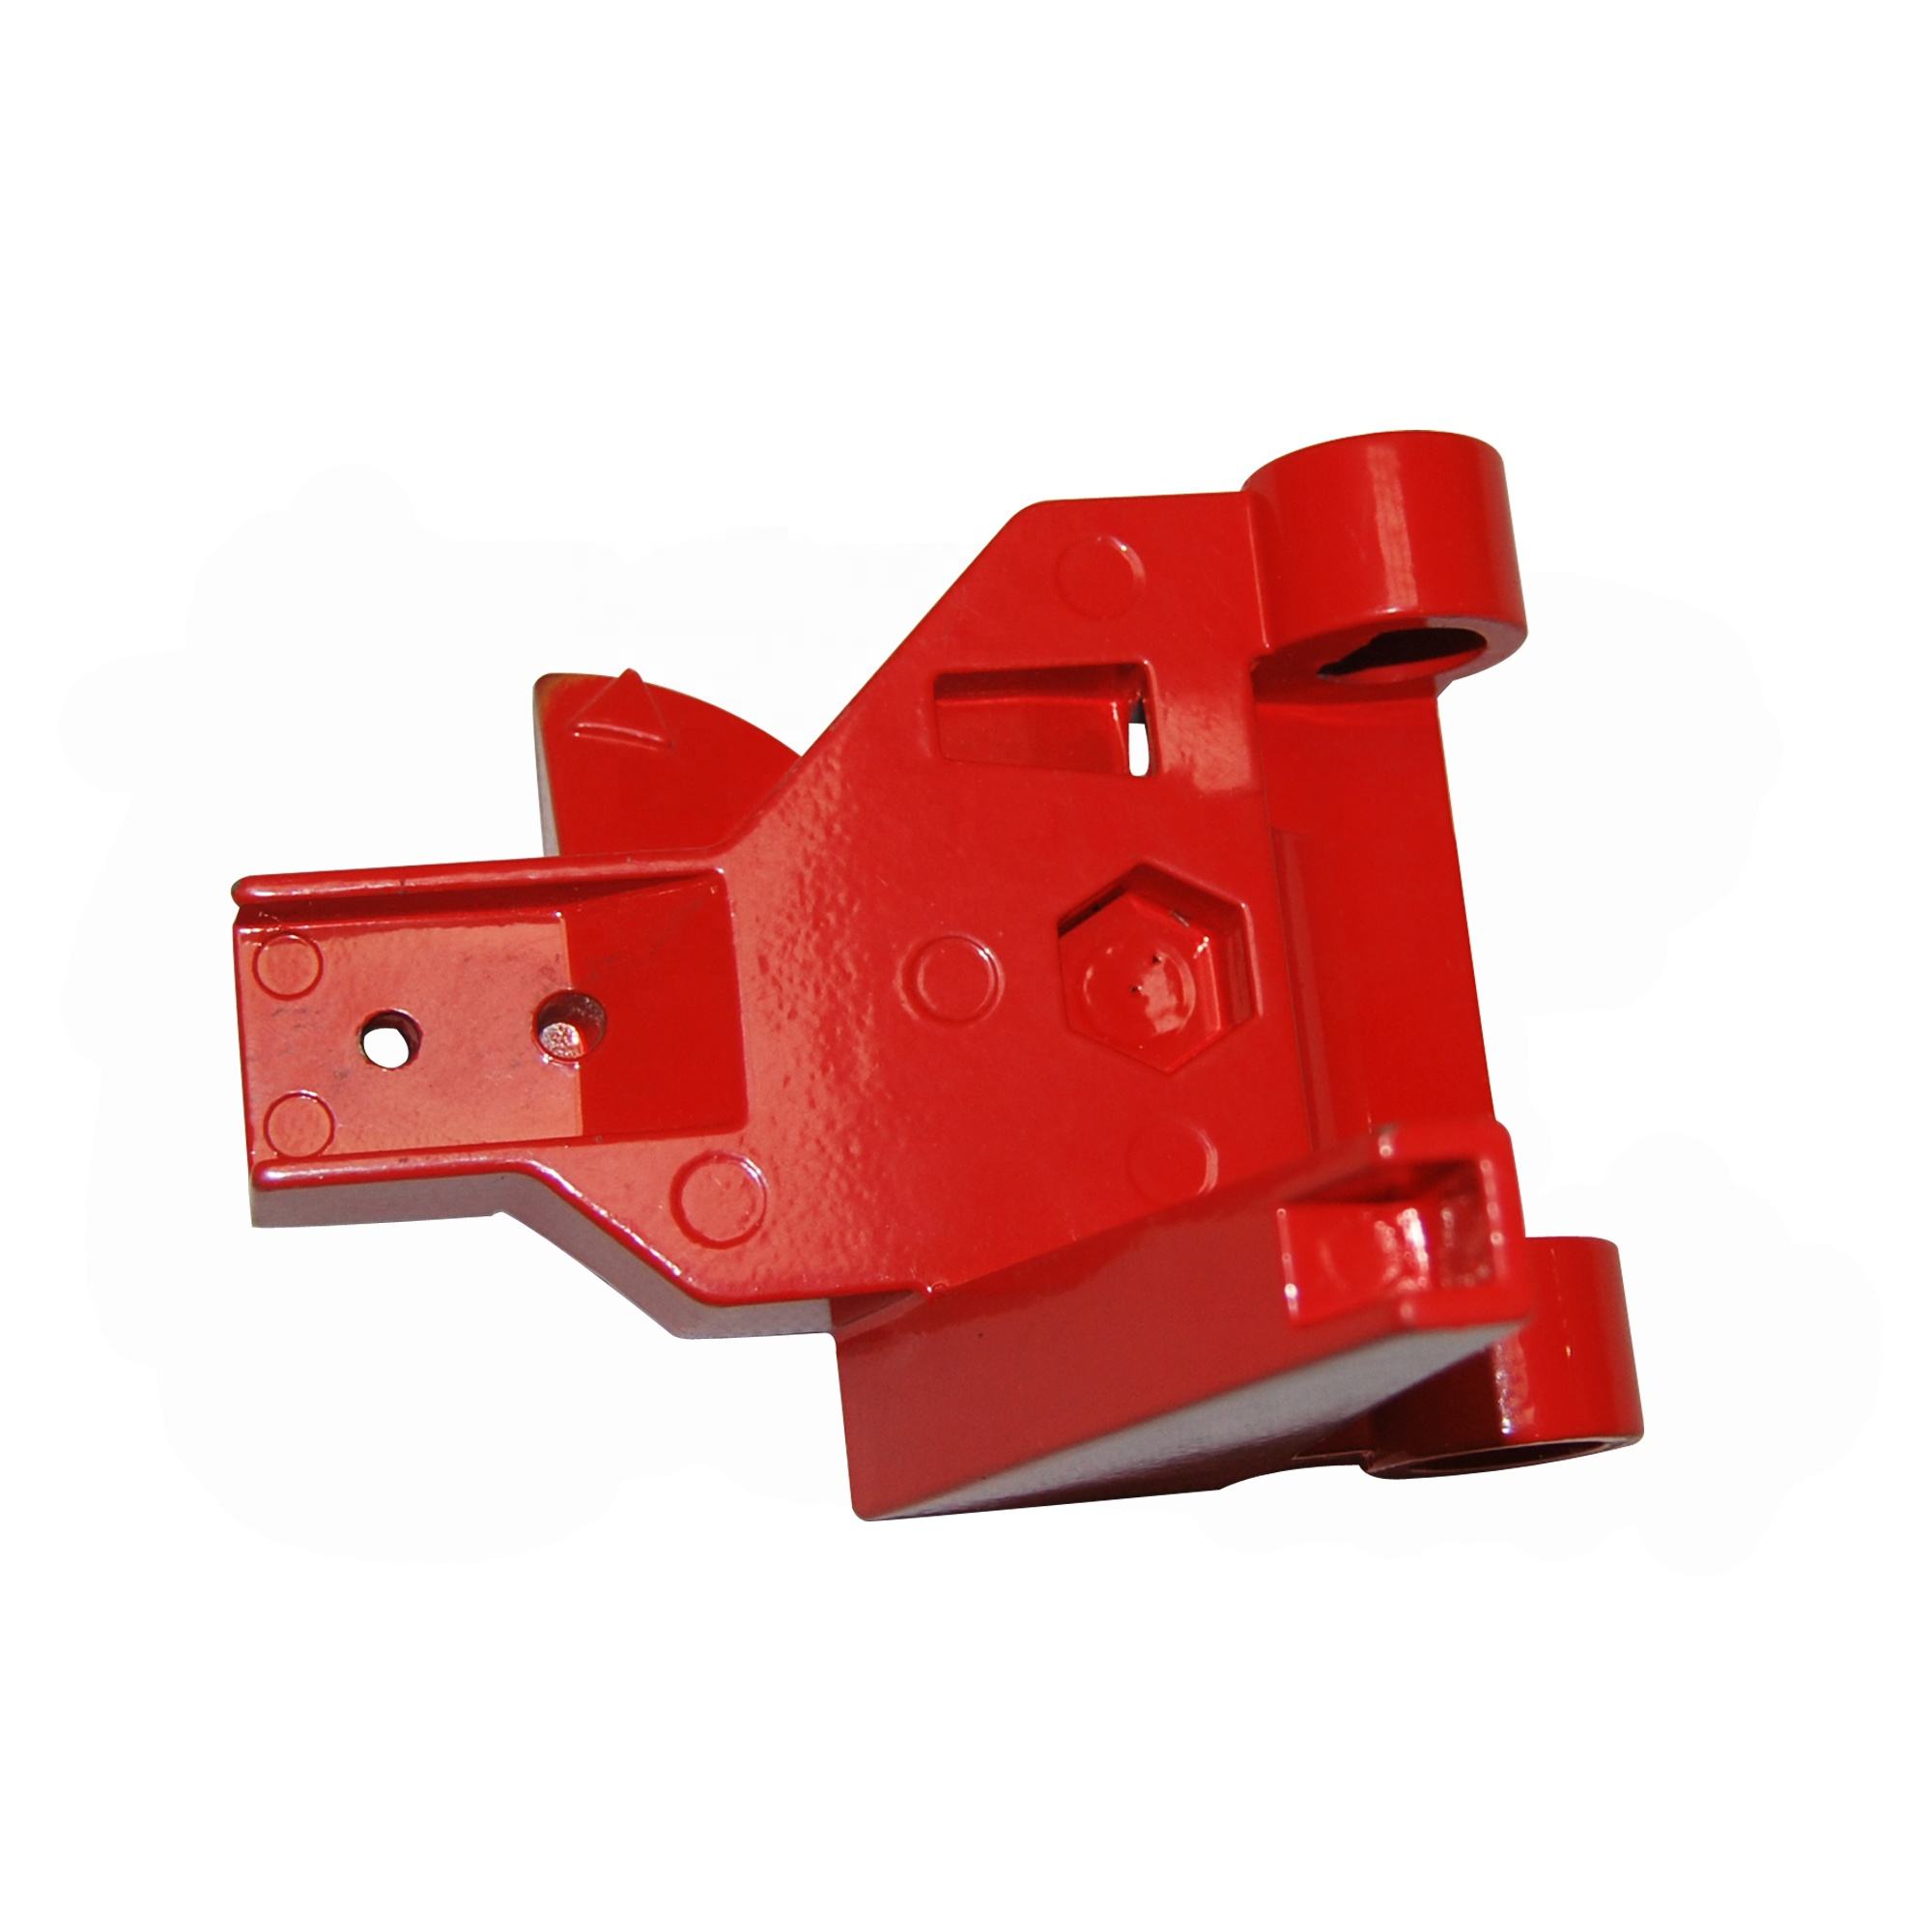 Aluminum Alloy Anodized Die Casting Bracket With Machining